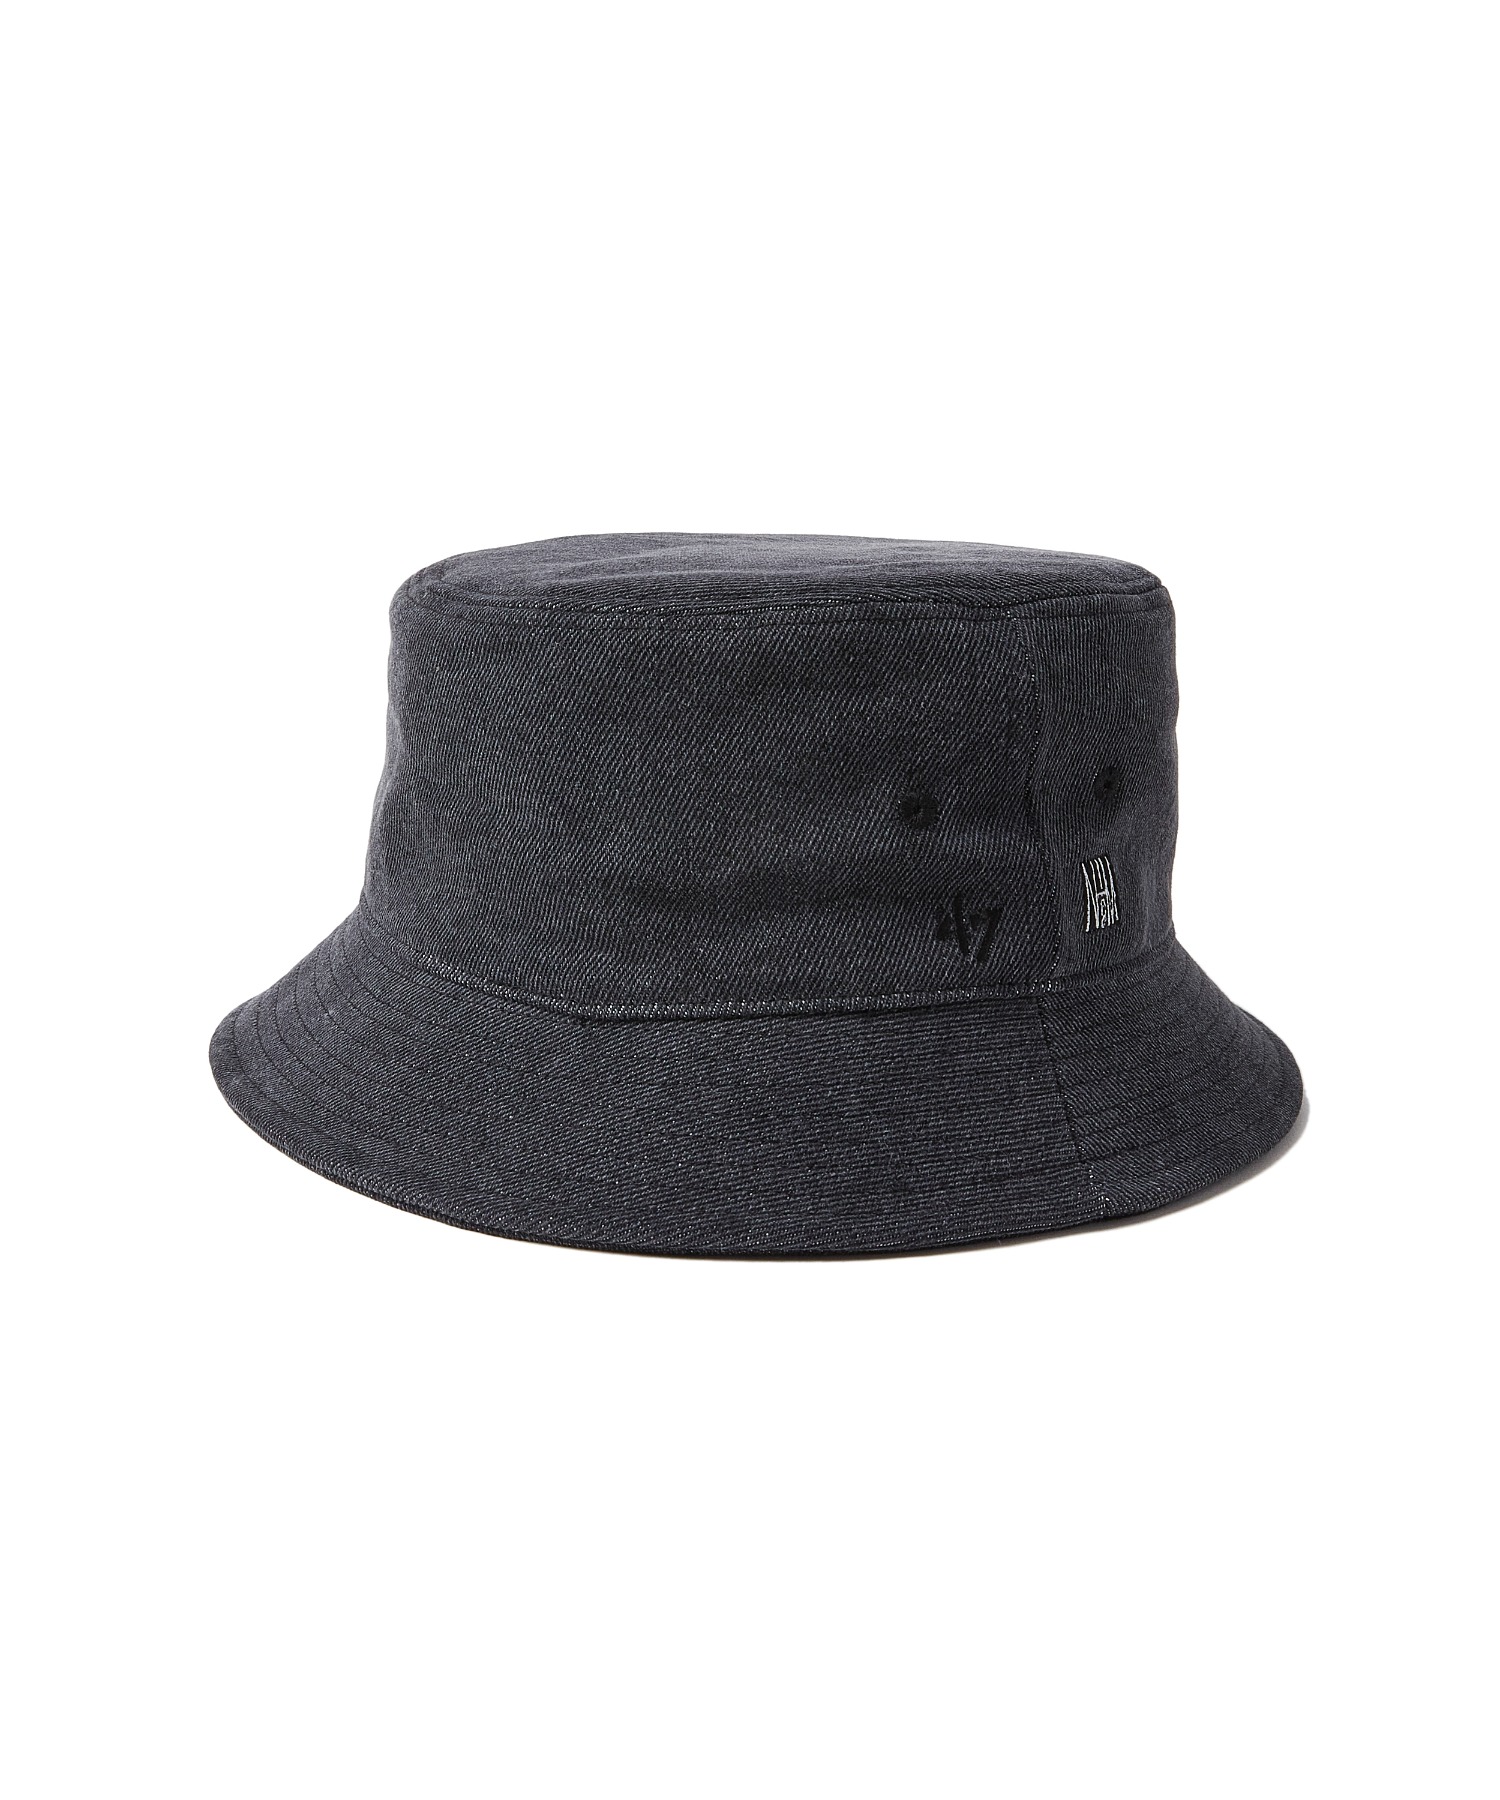 N.HOOLYWOOD COMPILE × ’47 HAT